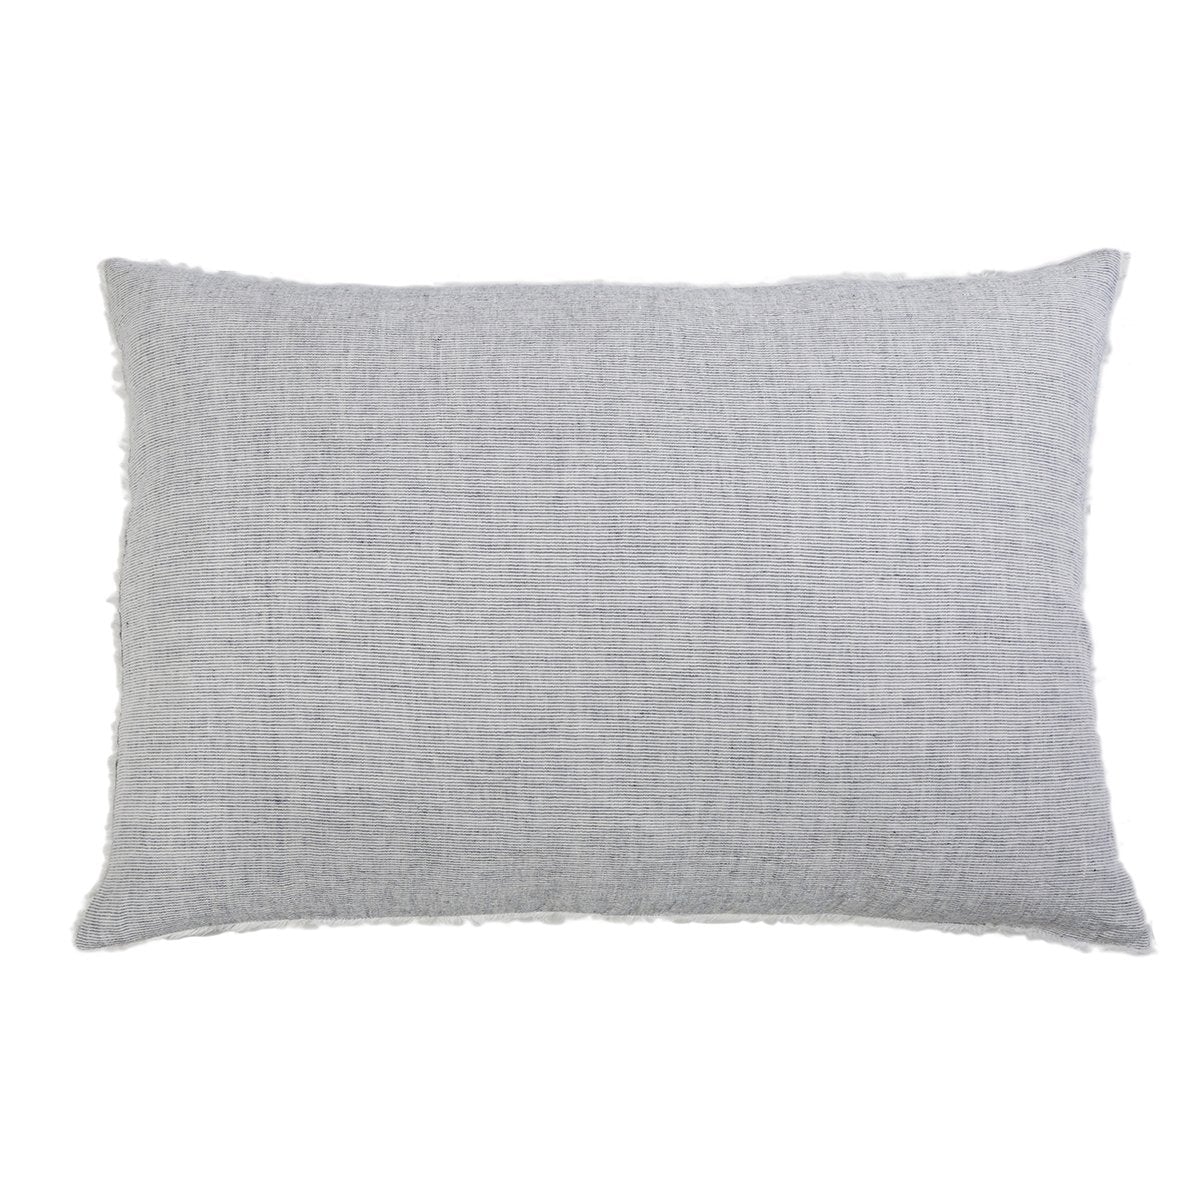 Logan Navy Big Pillow by Pom at Home